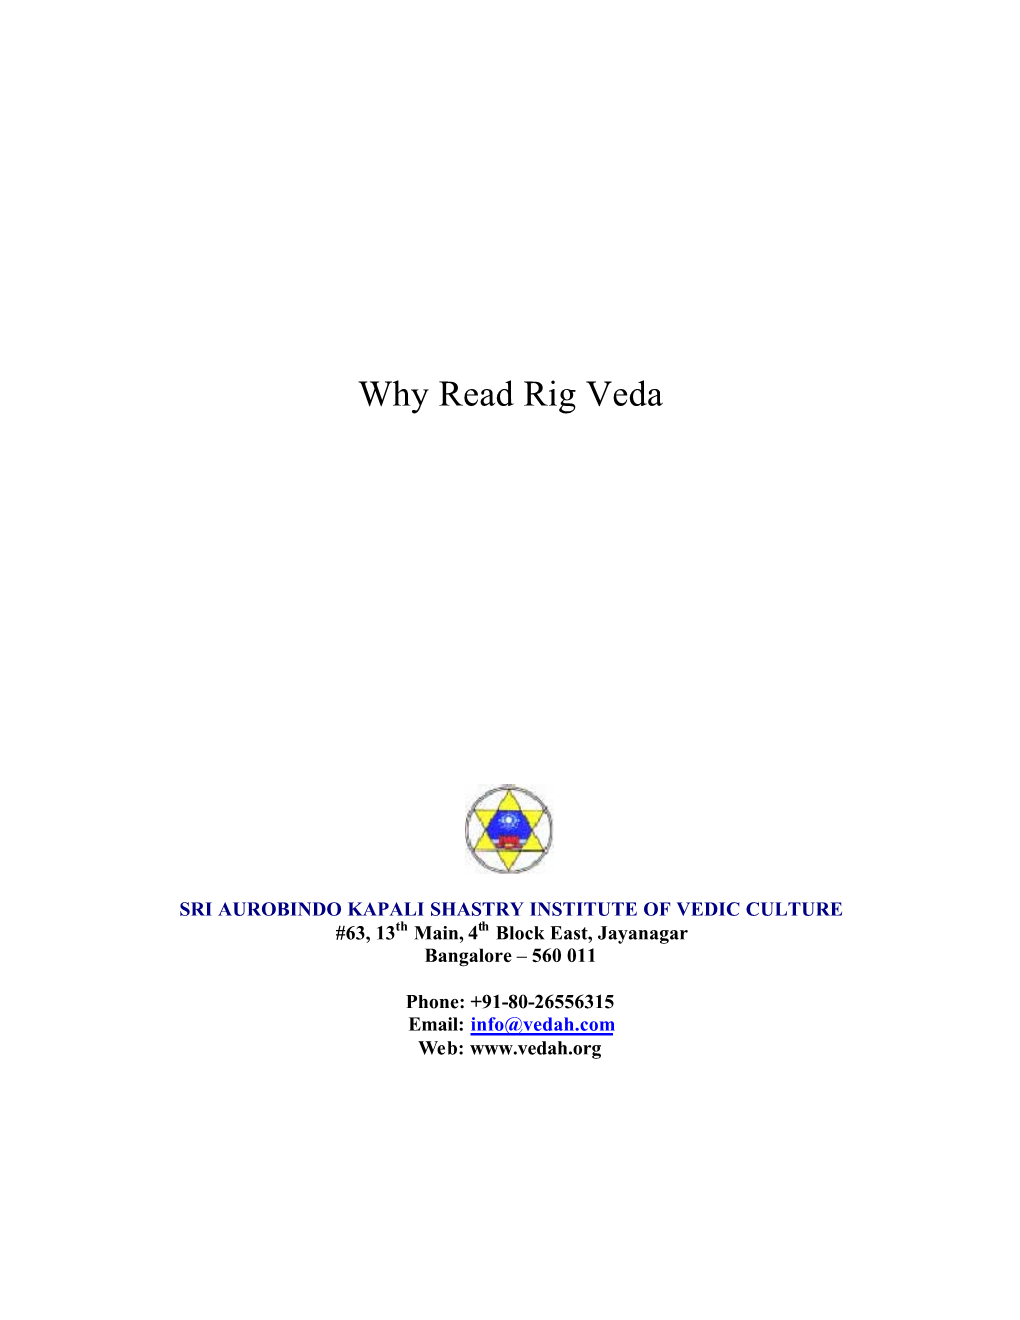 Why Read Rig Veda